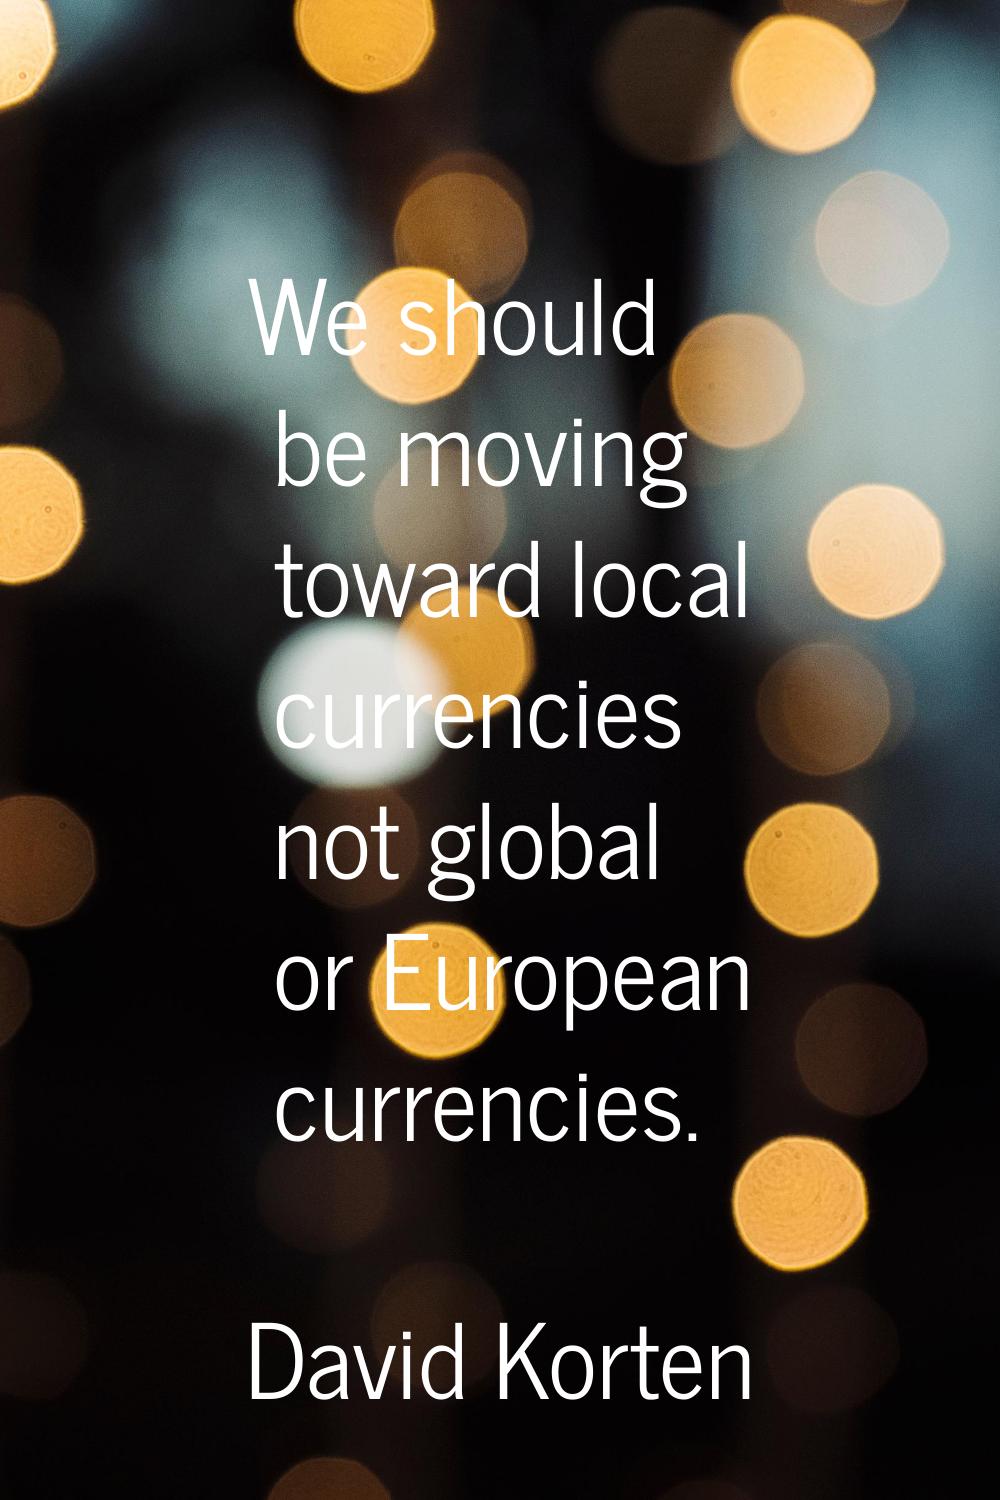 We should be moving toward local currencies not global or European currencies.